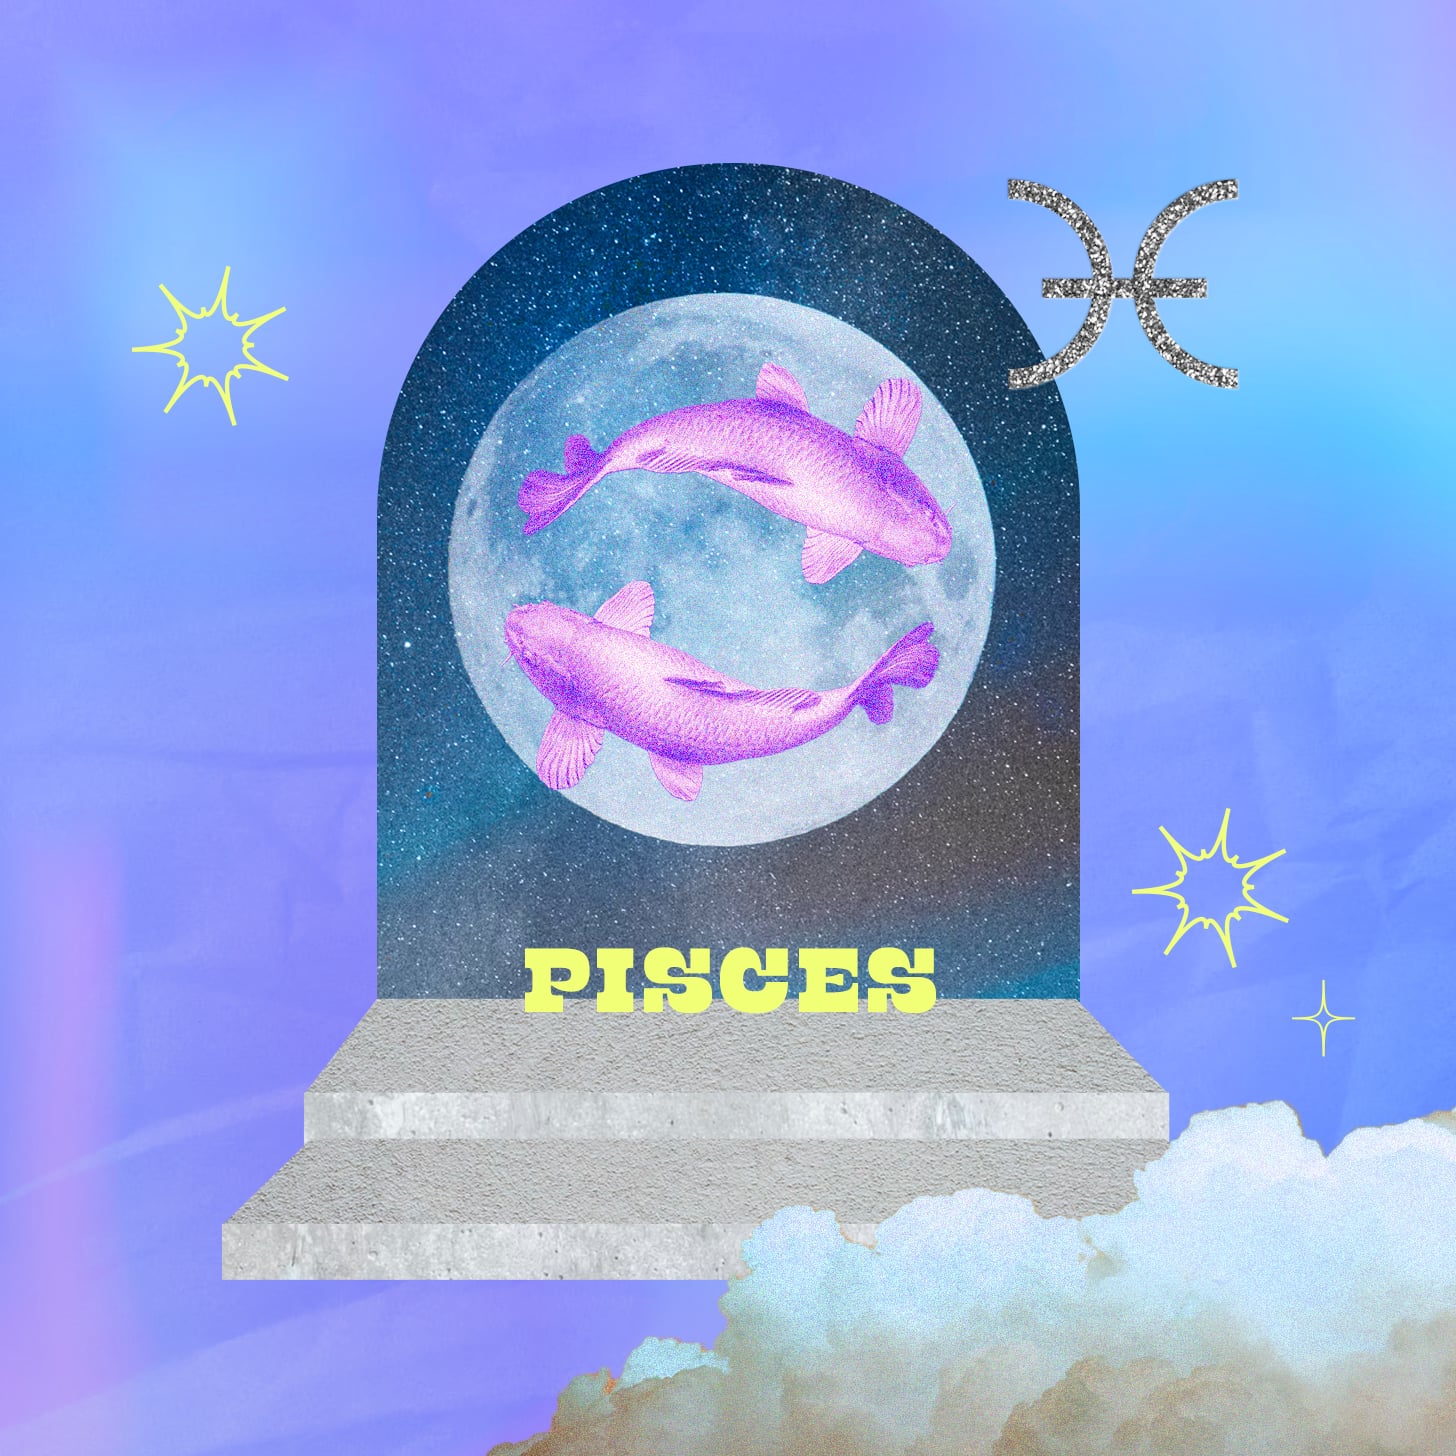 Pisces weekly horoscope May 1, 2022